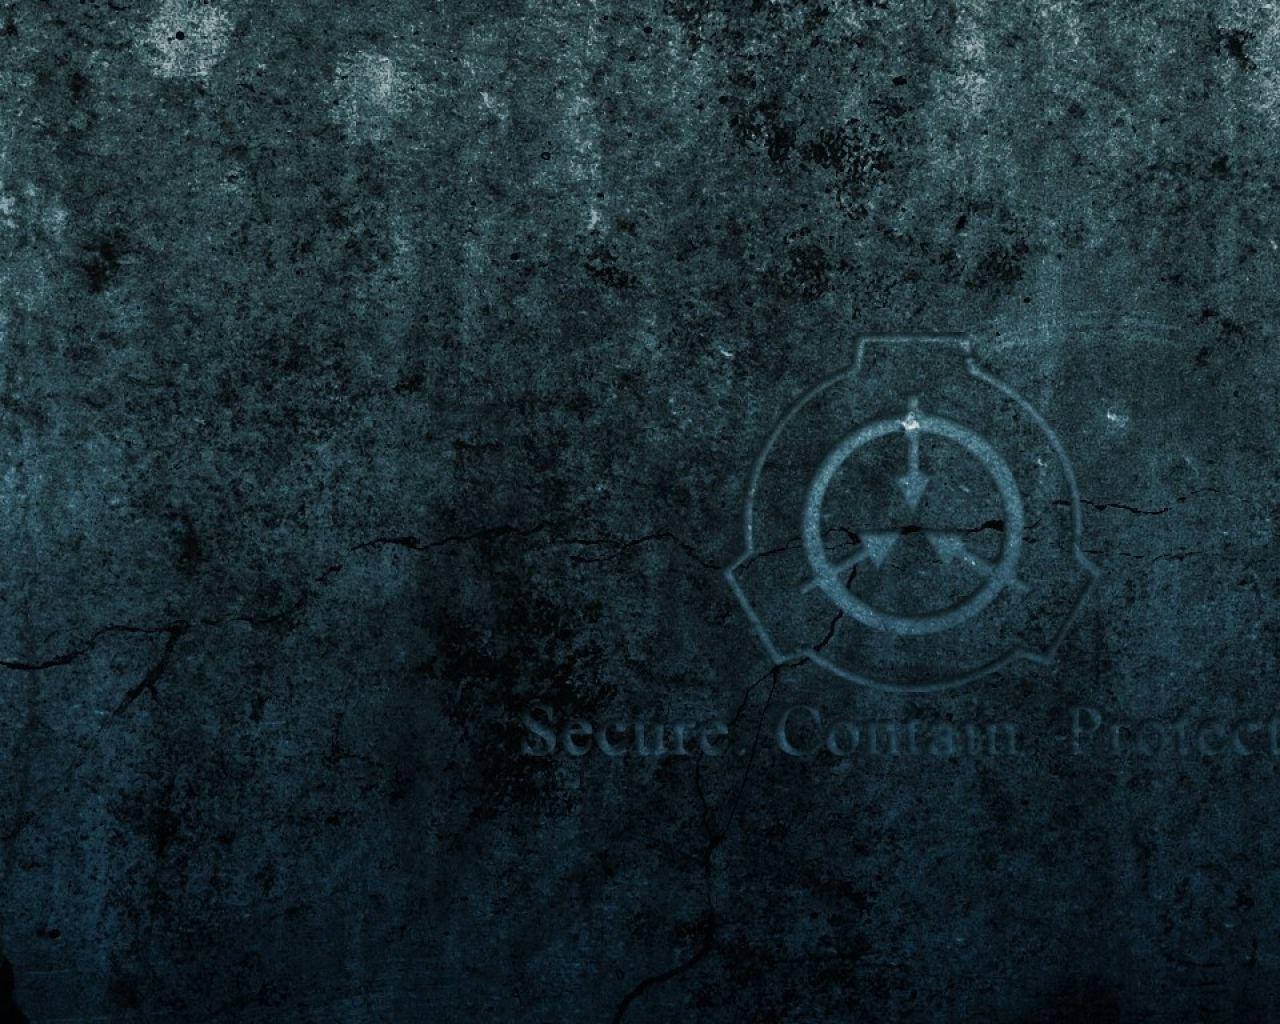 100+] Scp Wallpapers